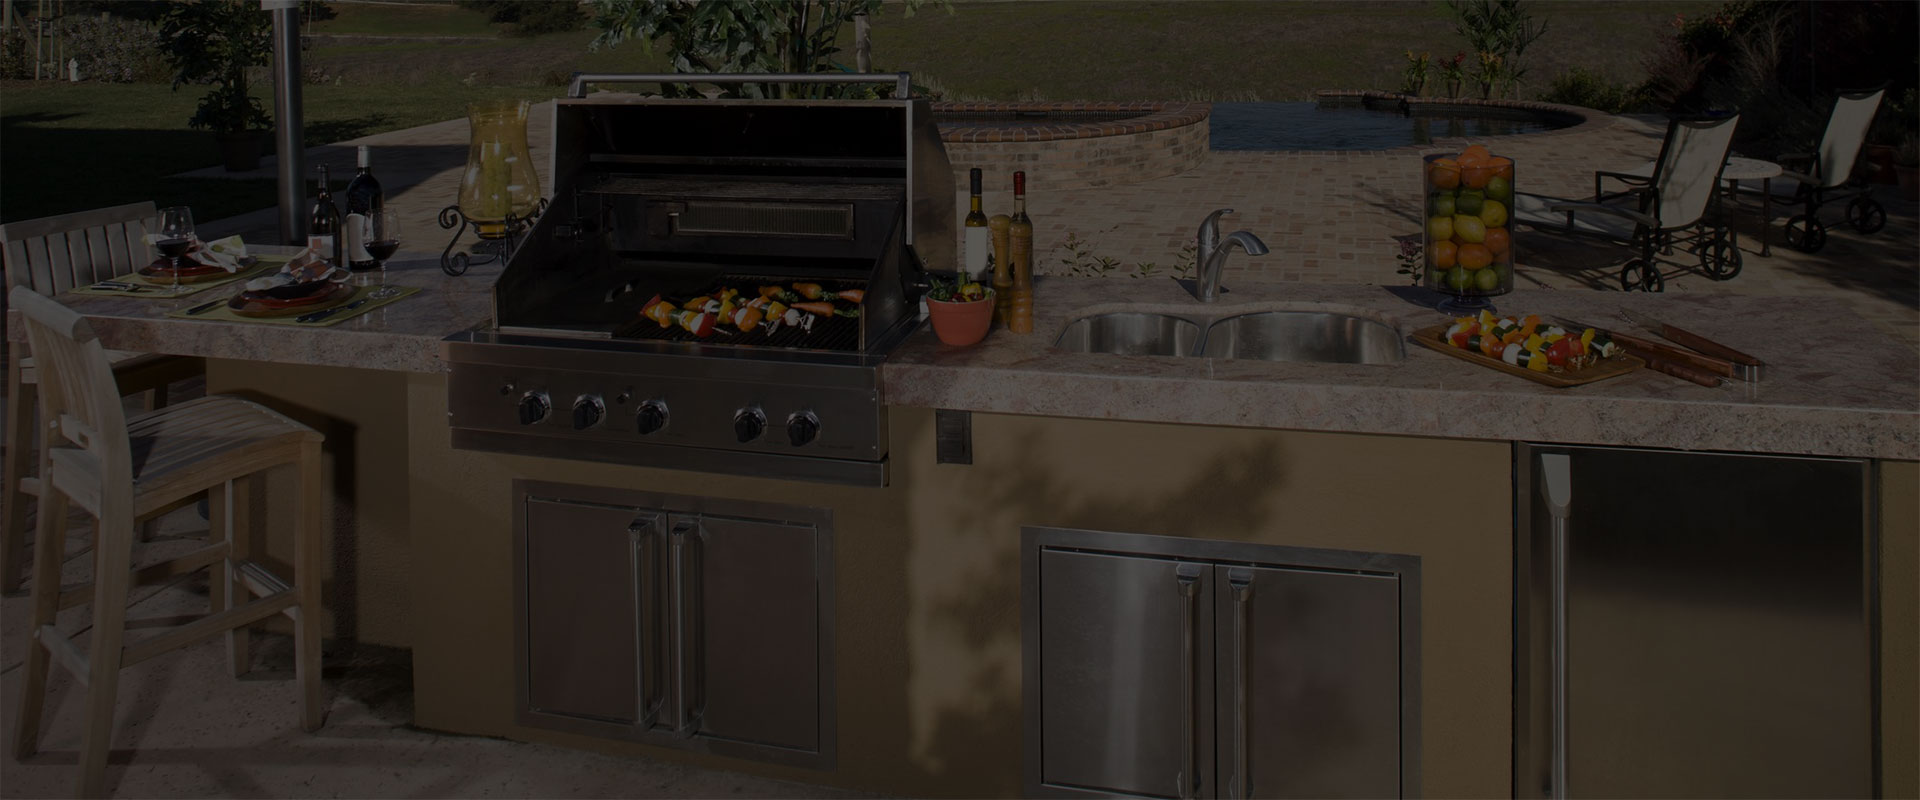 Grills and Firepits